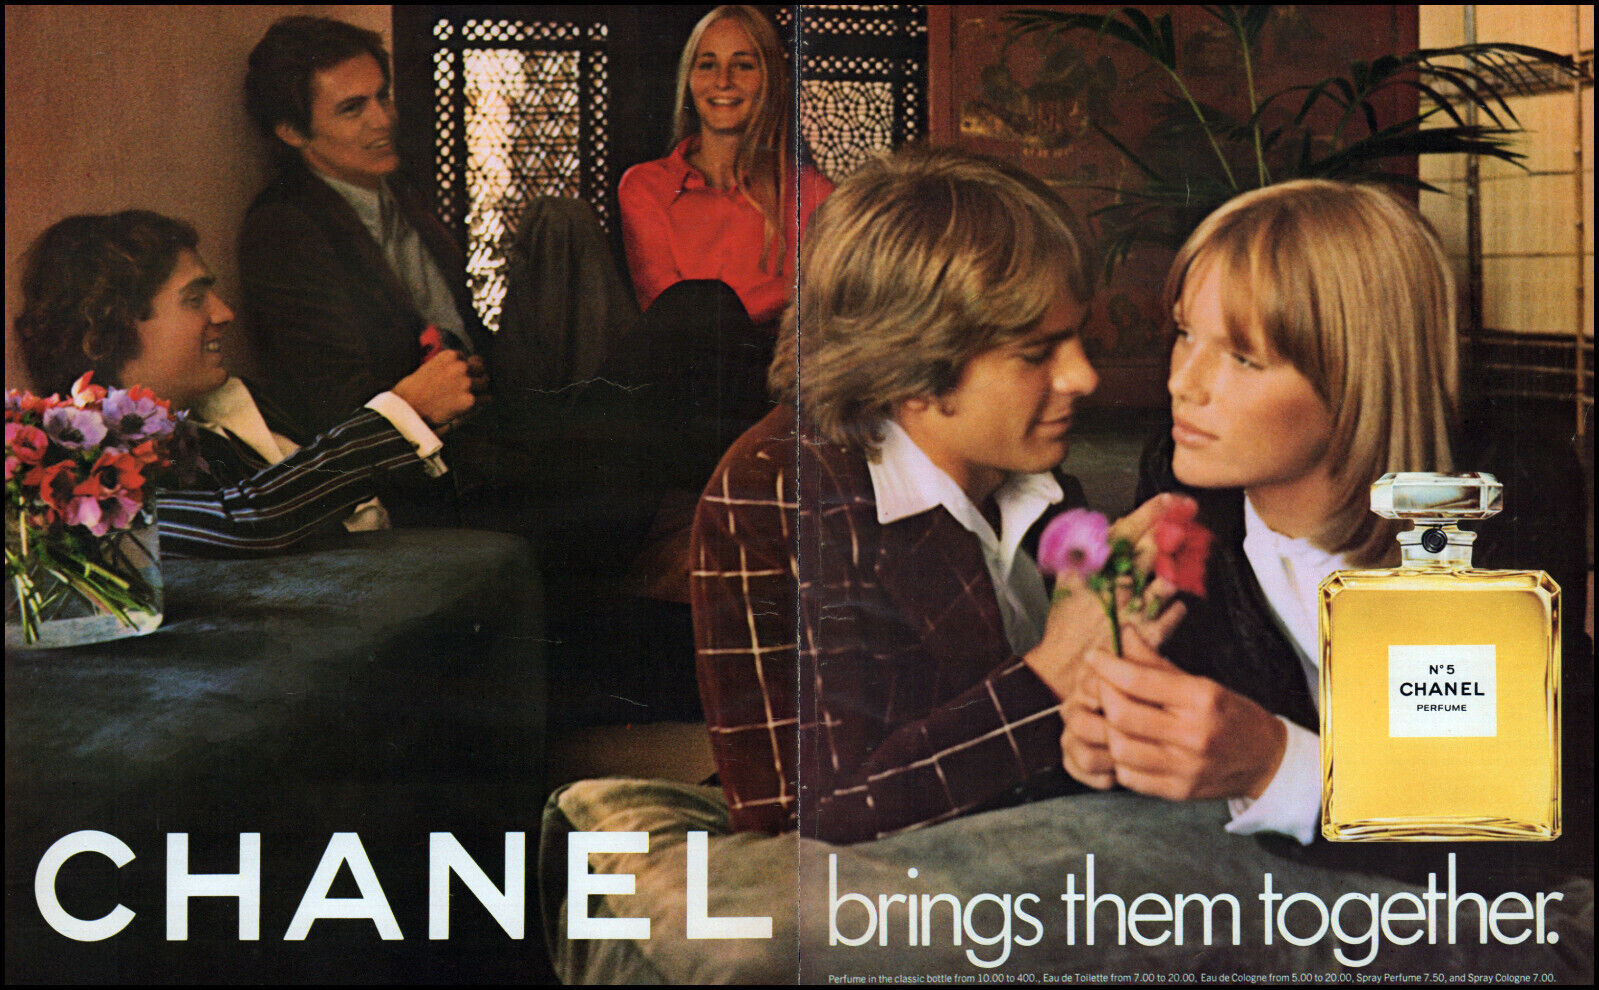 1974 CHANEL N°5 teenage couples Chanel brings them together photo print ad adL6